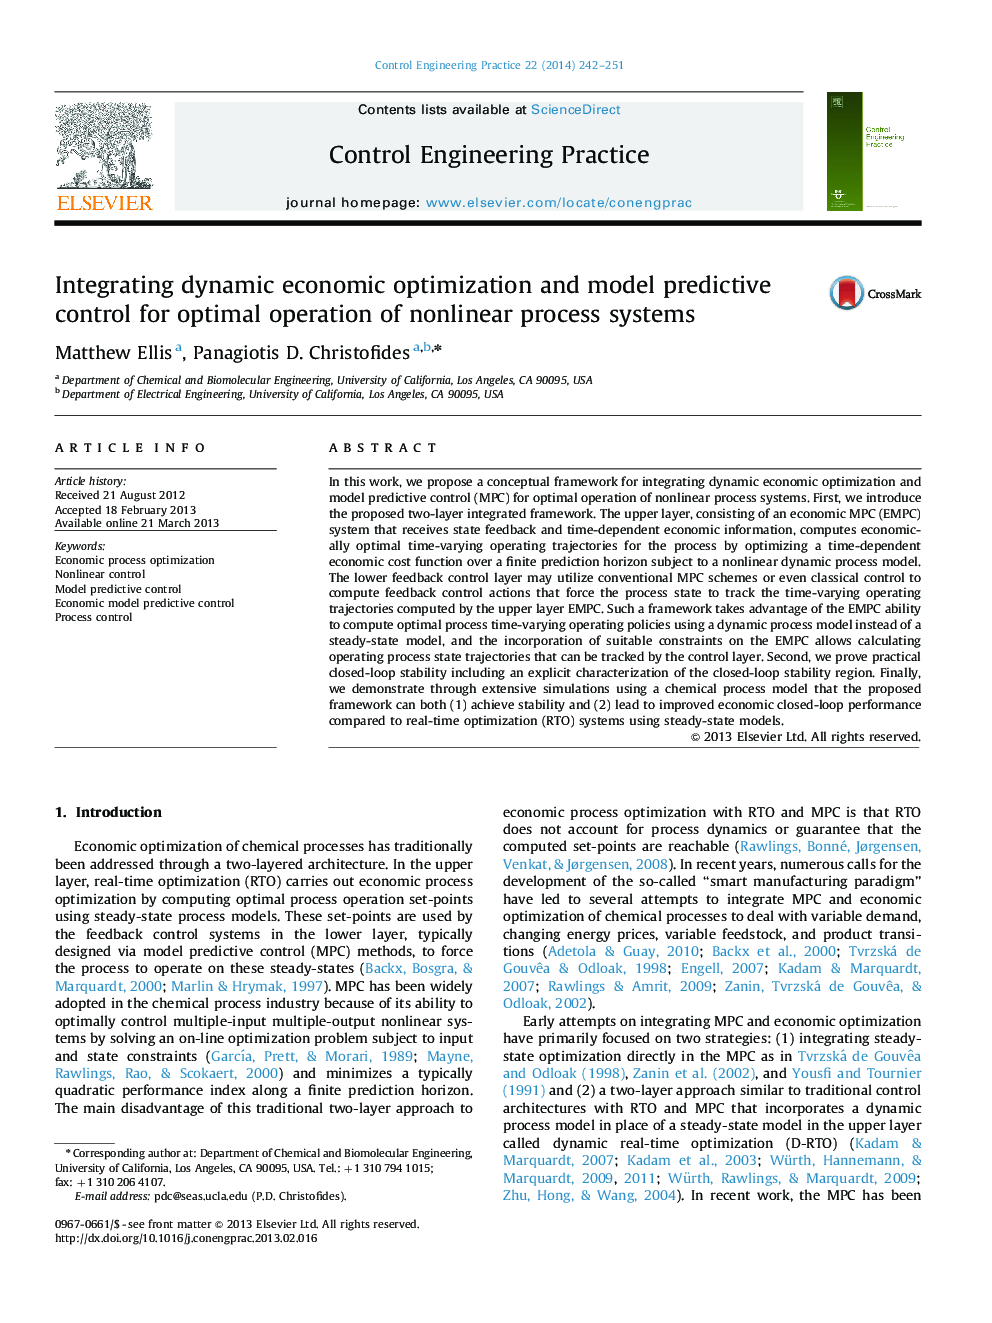 Integrating dynamic economic optimization and model predictive control for optimal operation of nonlinear process systems